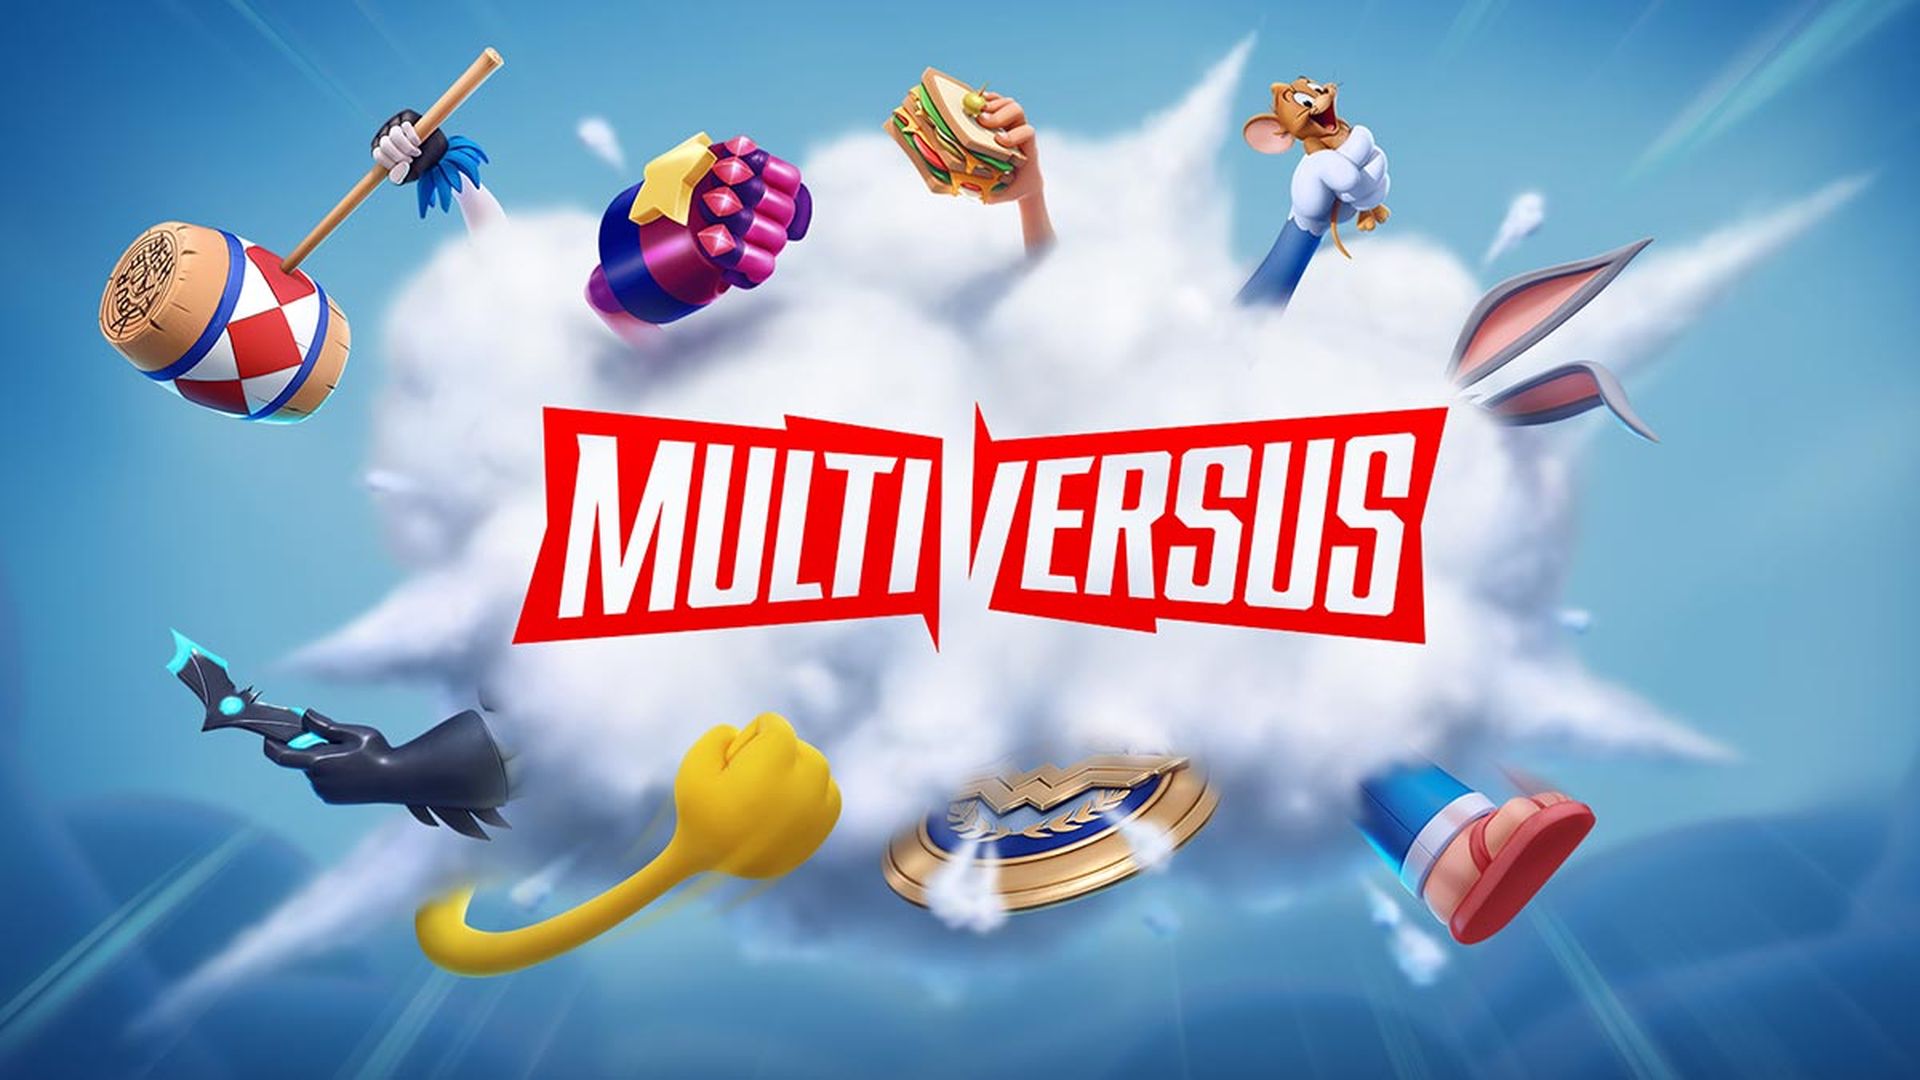 In this article, we will cover how to get MultiVersus for free and answer some questions like "Is MultiVersus free on PS5?" and "How to get MultiVersus code?"